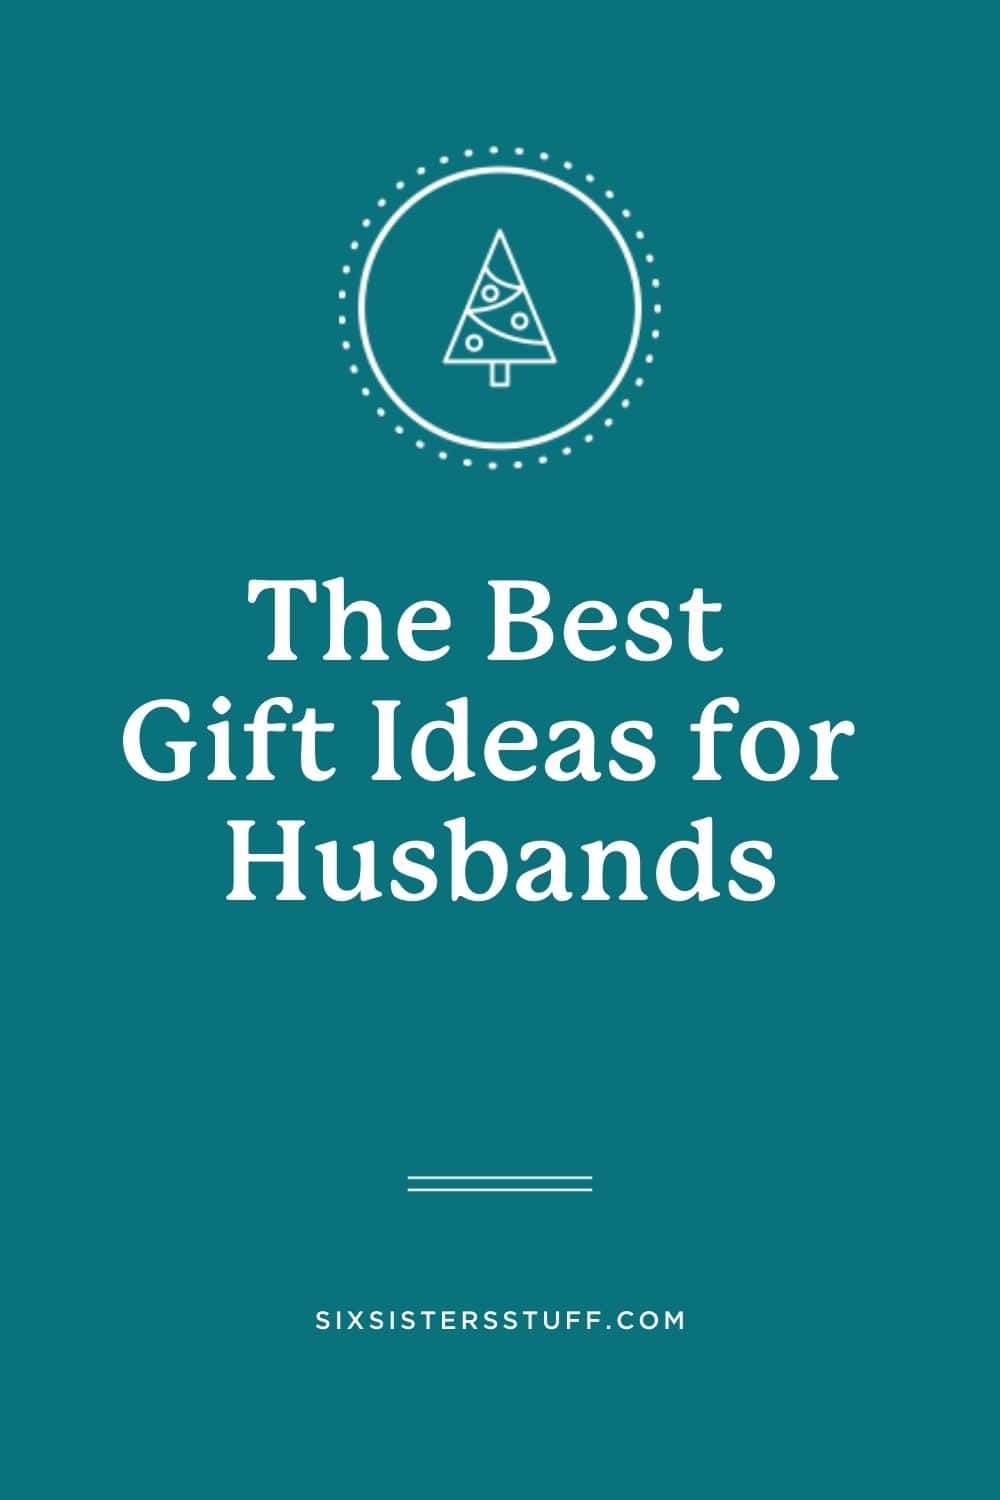 Best Christmas Gift Ideas for Boyfriends and Husbands 2018 | GiftsOnline4U